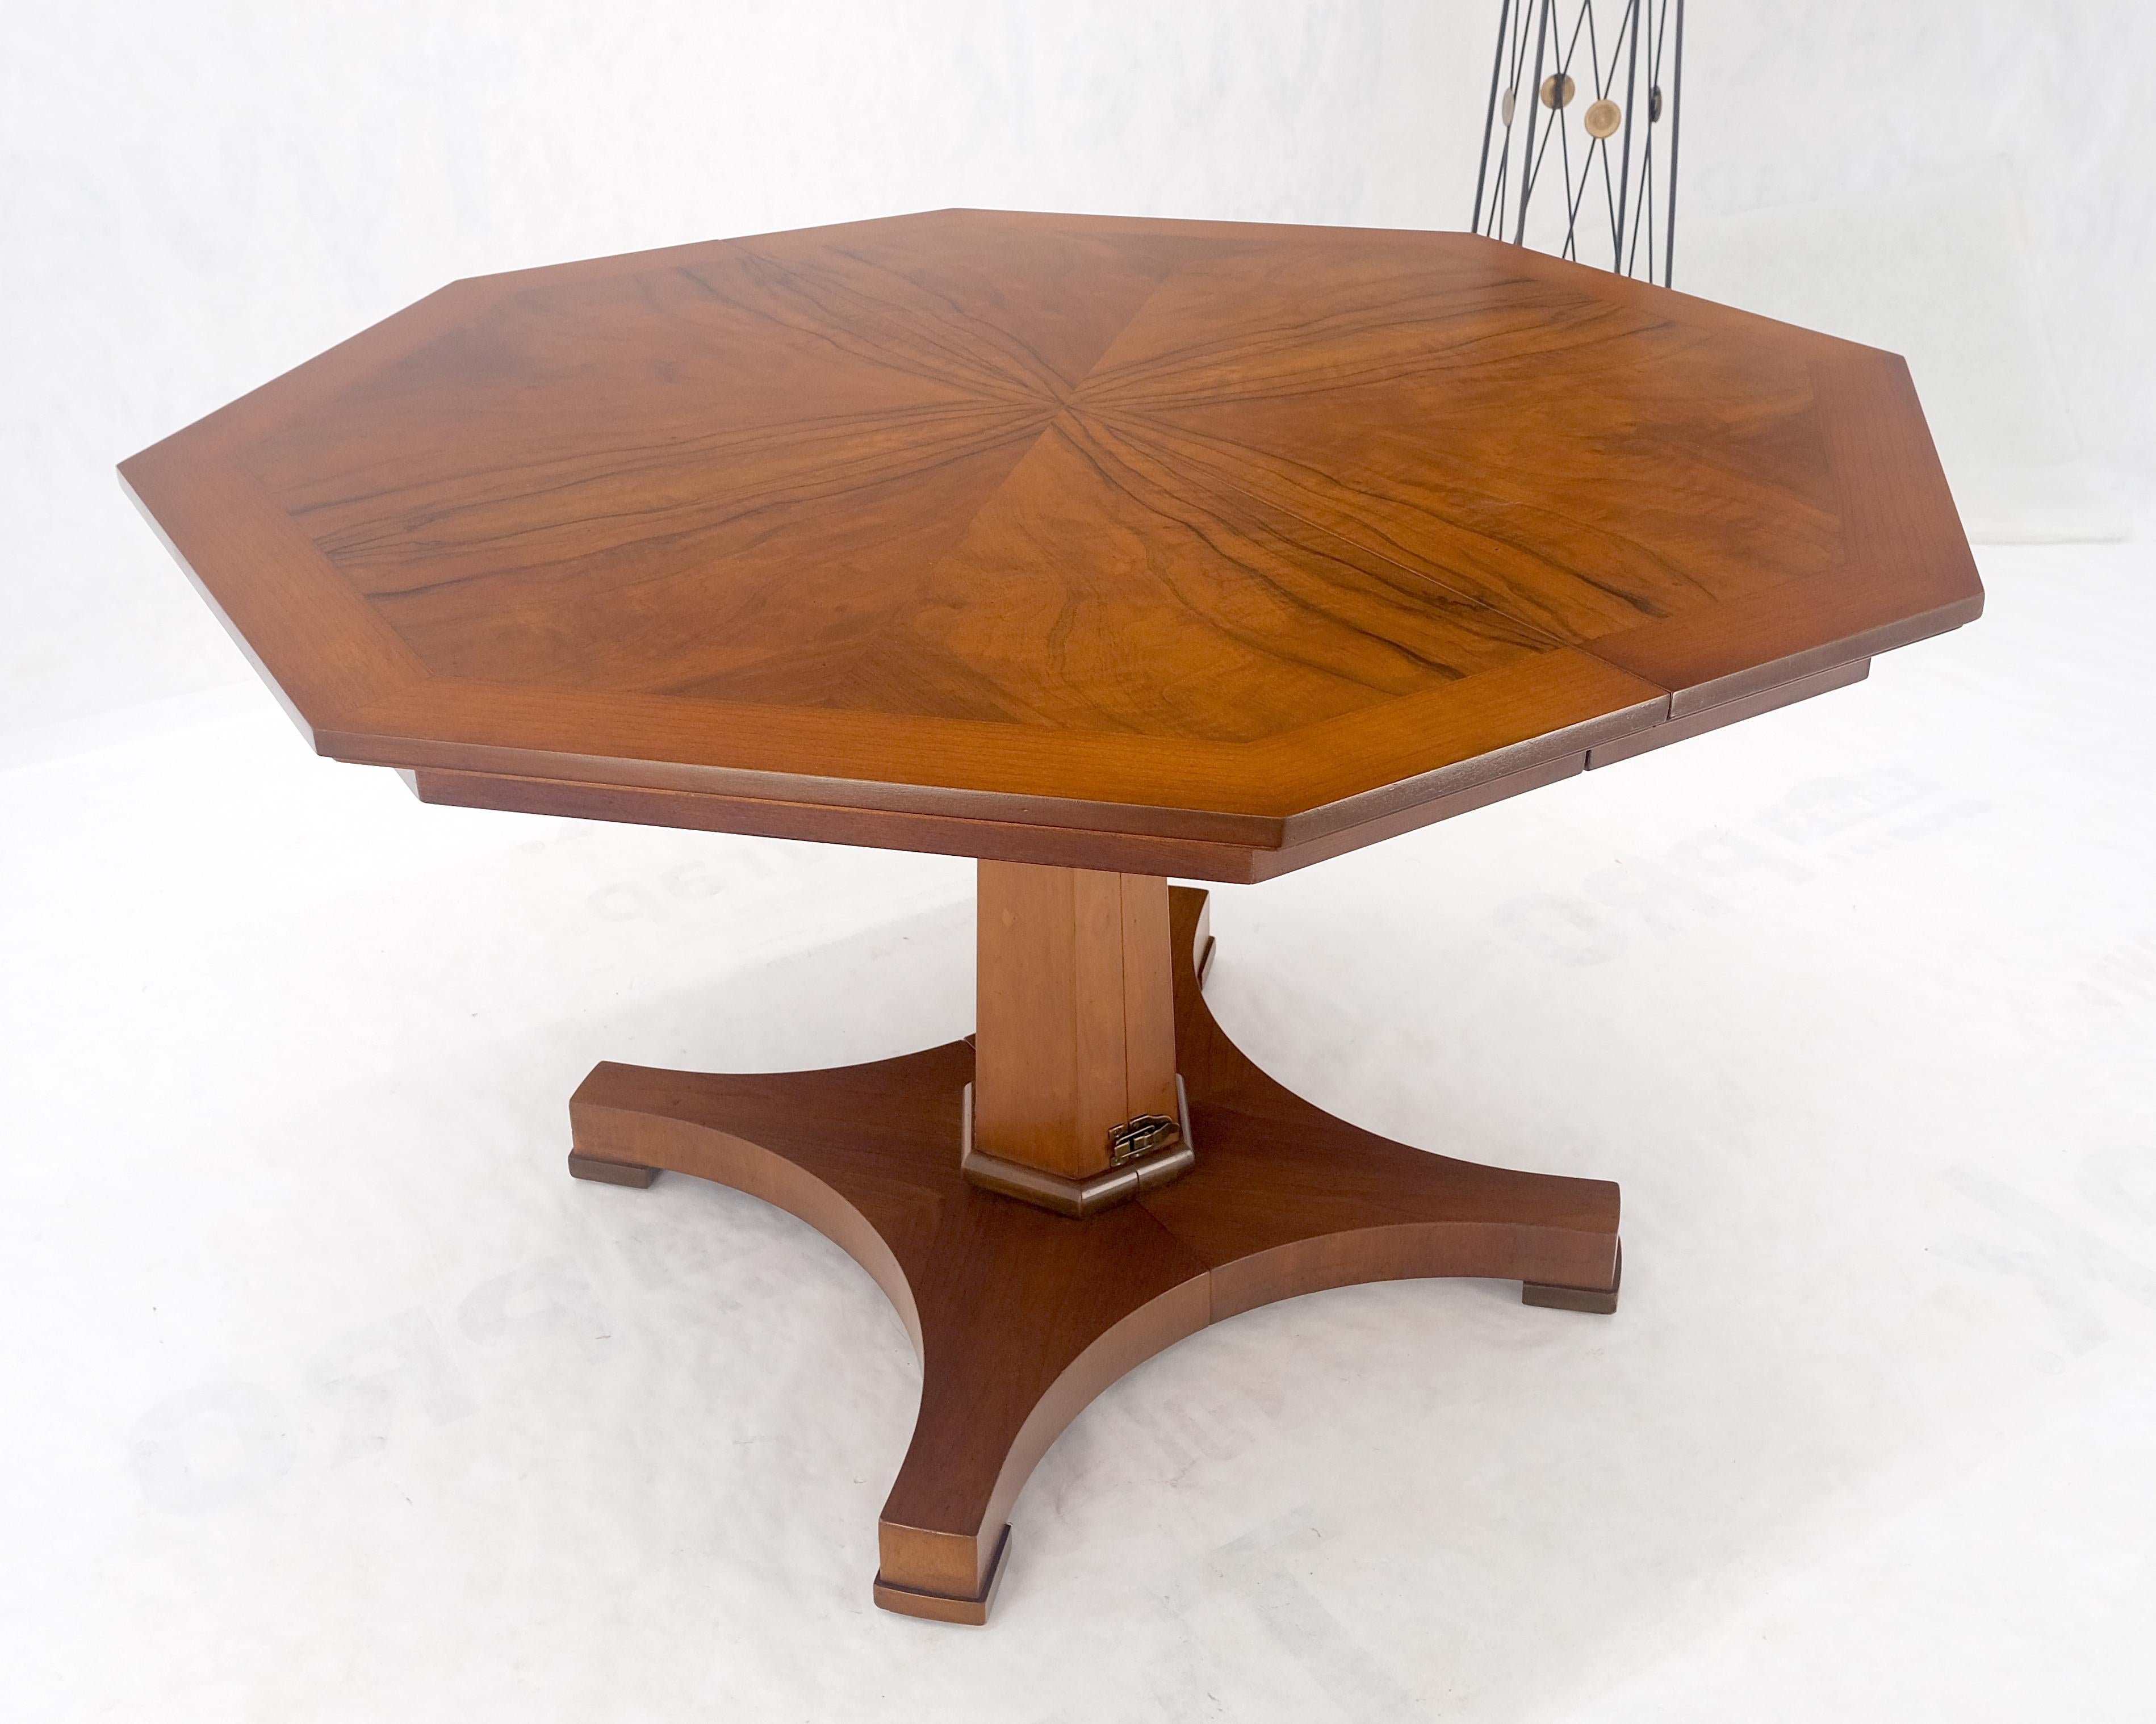 Baker LIght Walnut Round Octagon Single Base Two Leaves Dining Room Table Mint! In Good Condition For Sale In Rockaway, NJ